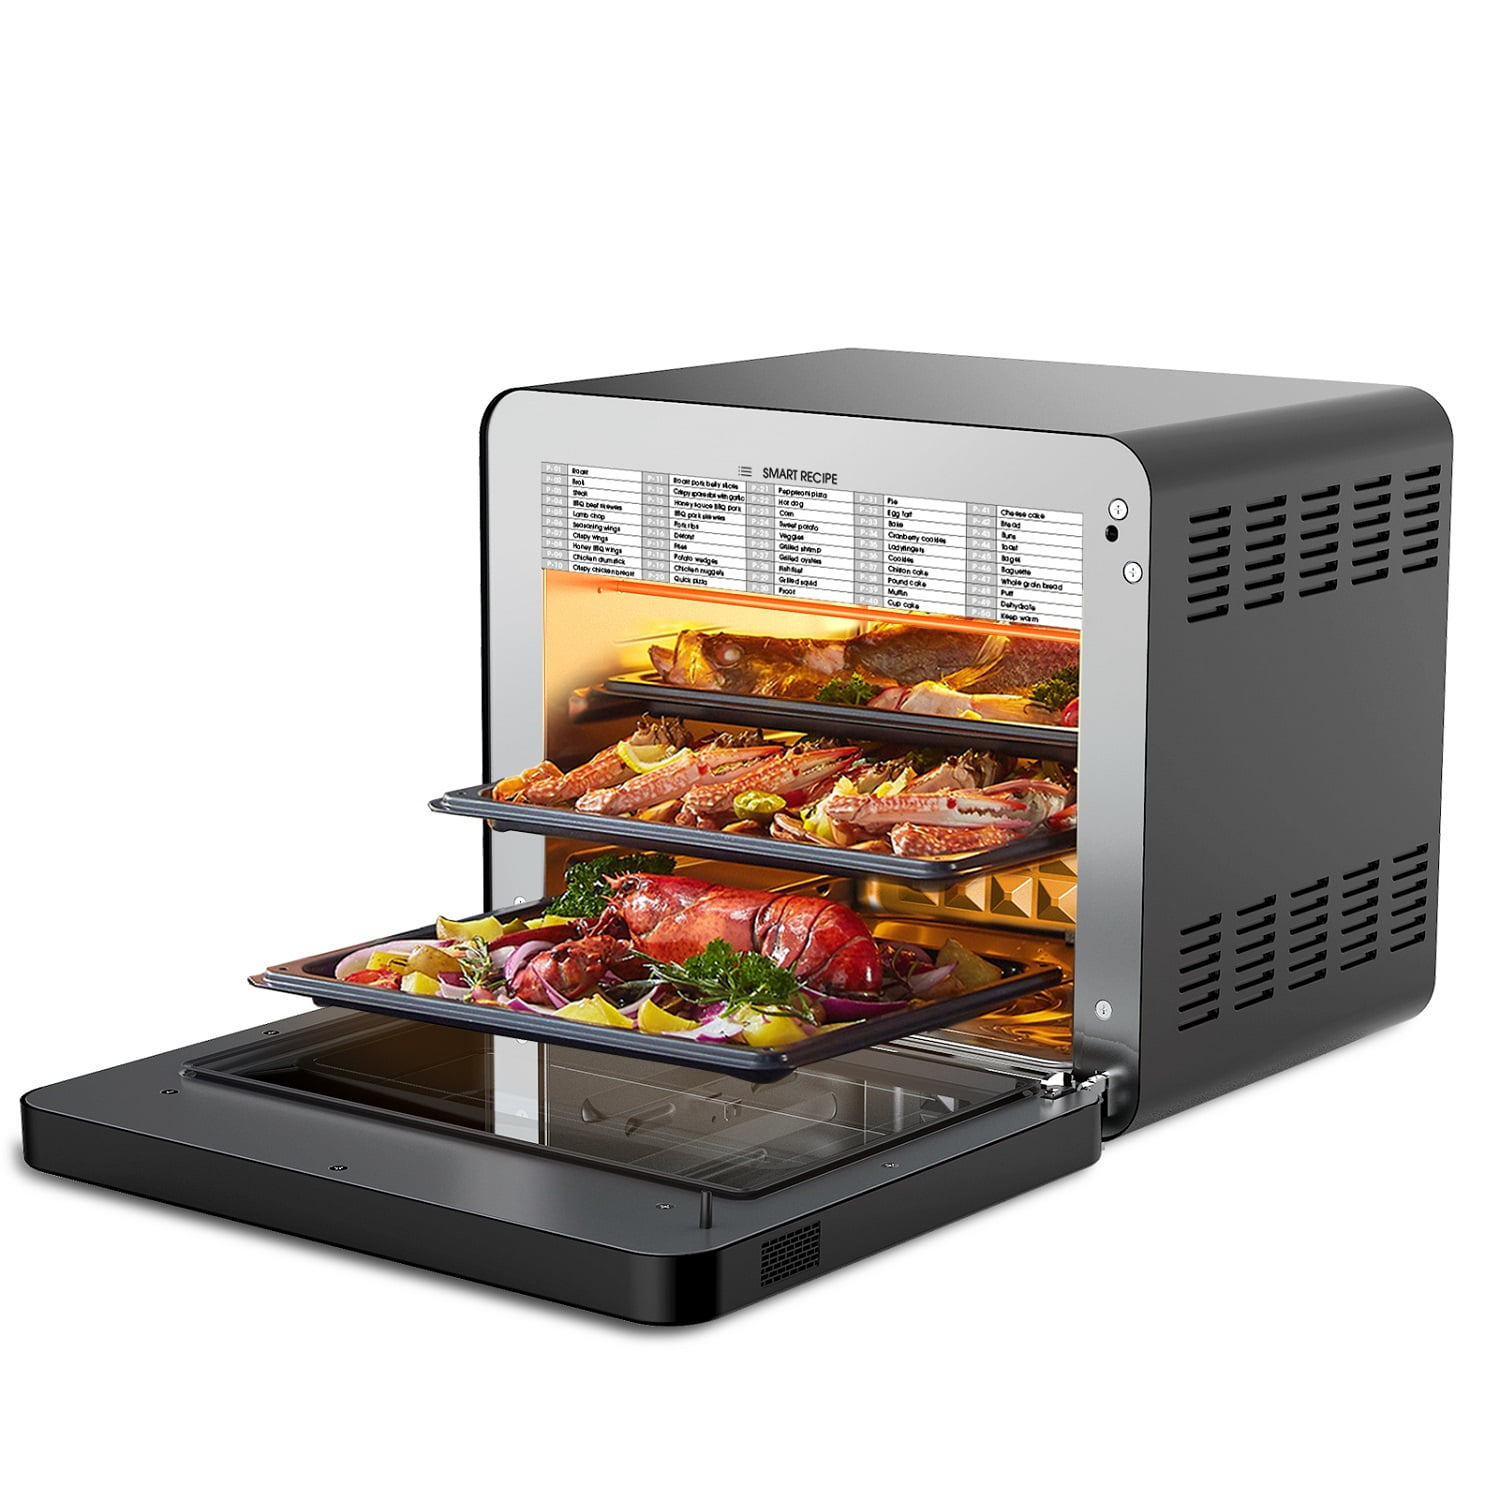 Lumme Air Fryer, Toaster Oven, and Dehydrator Combo, 1 unit - Kroger